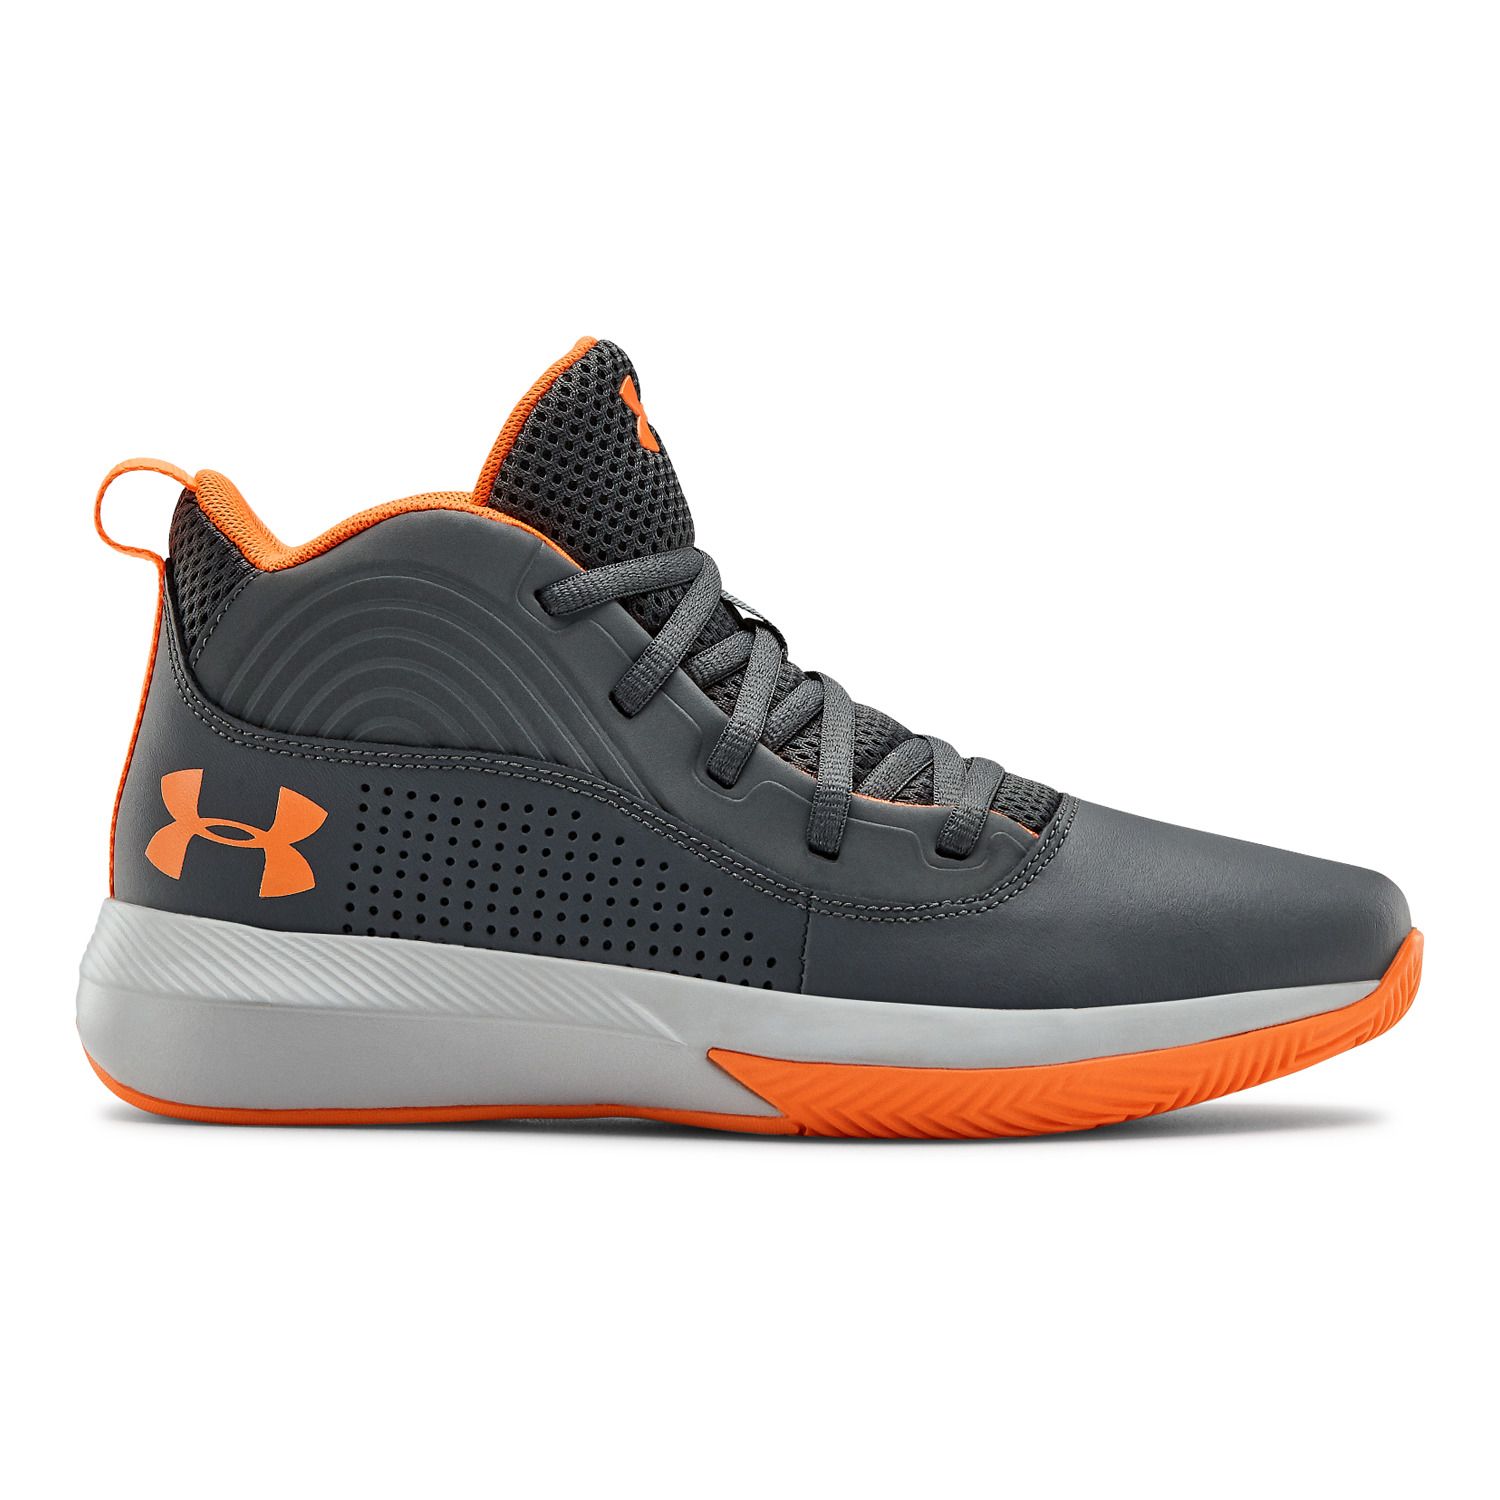 under armor kids basketball shoes